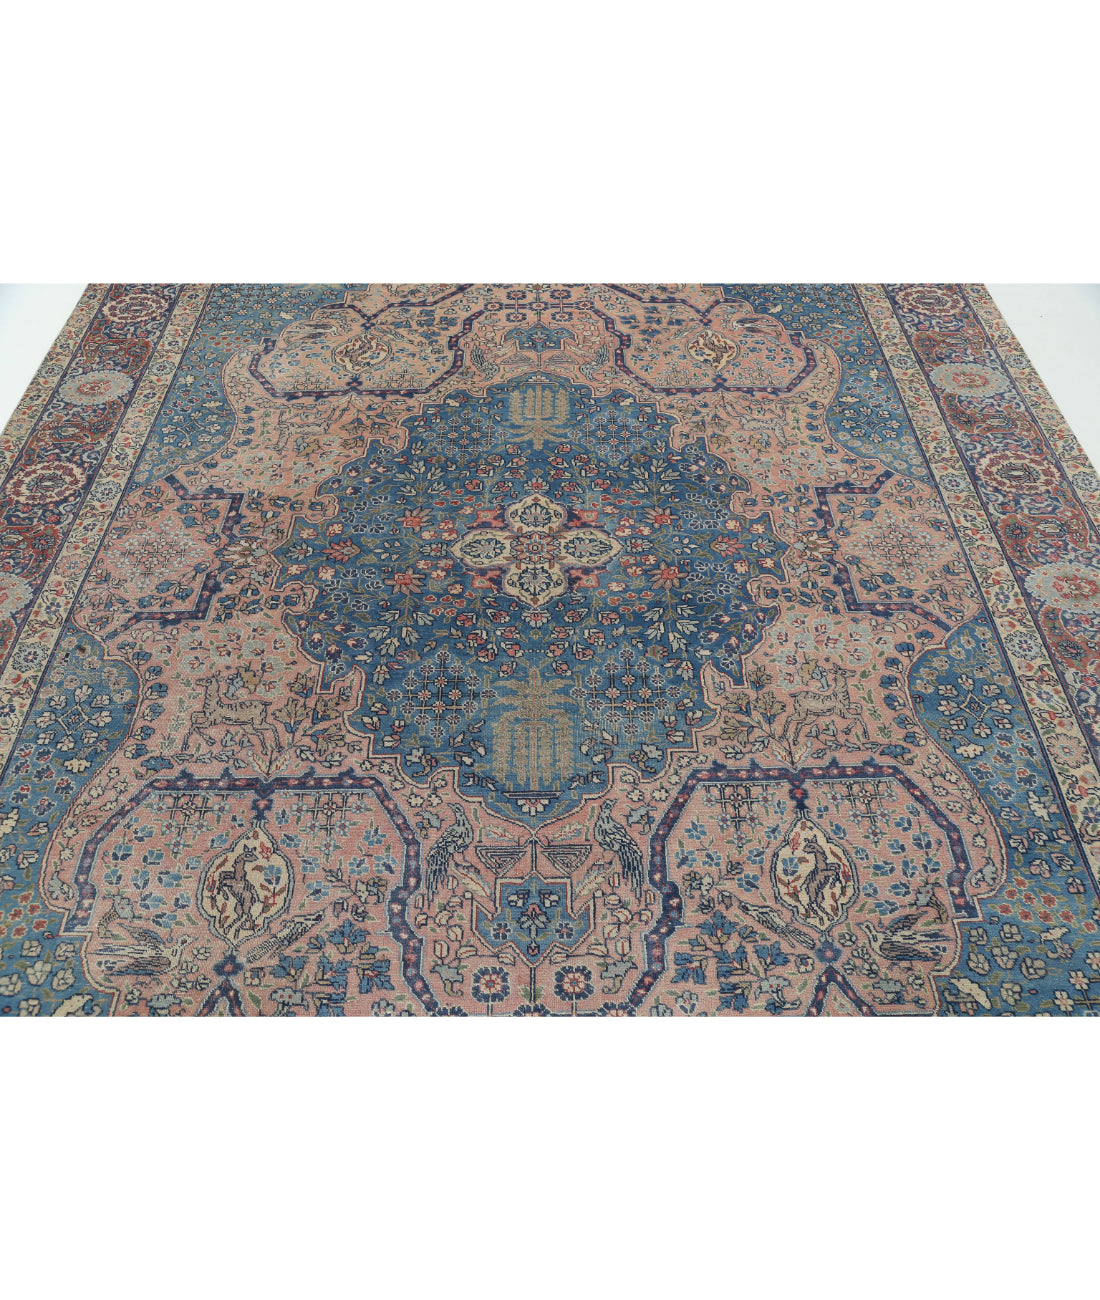 Hand Knotted Antique Persian Tabriz Wool Rug - 8'6'' x 11'3'' 8'6'' x 11'3'' (255 X 338) / Pink / Blue